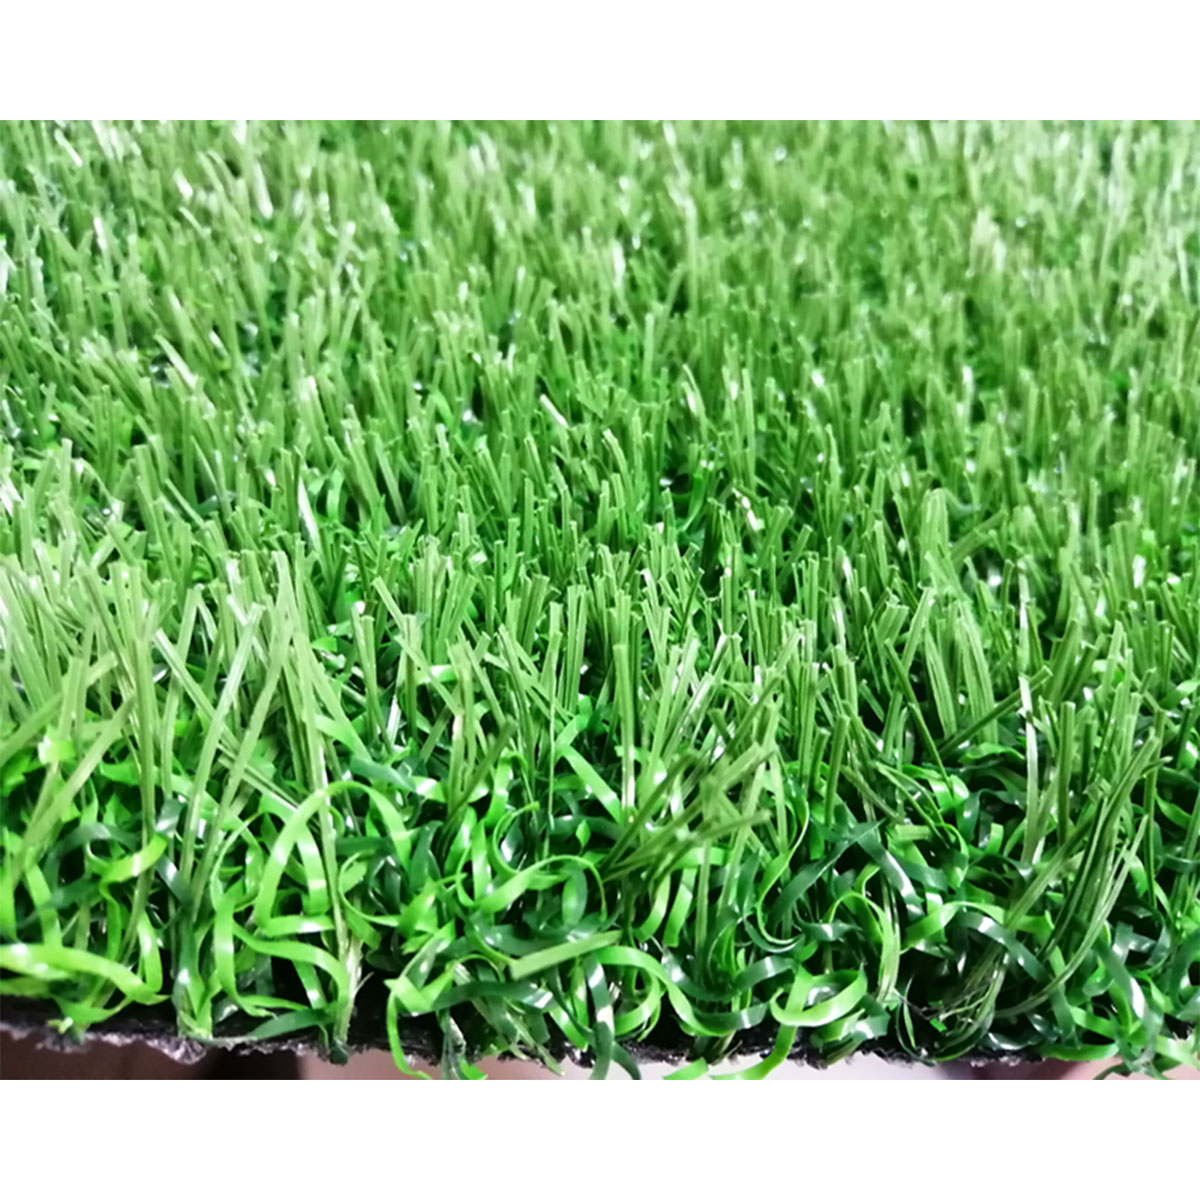 Why We Don’t Recommend Artificial Grass for Most People | Reviews by Wirecutter